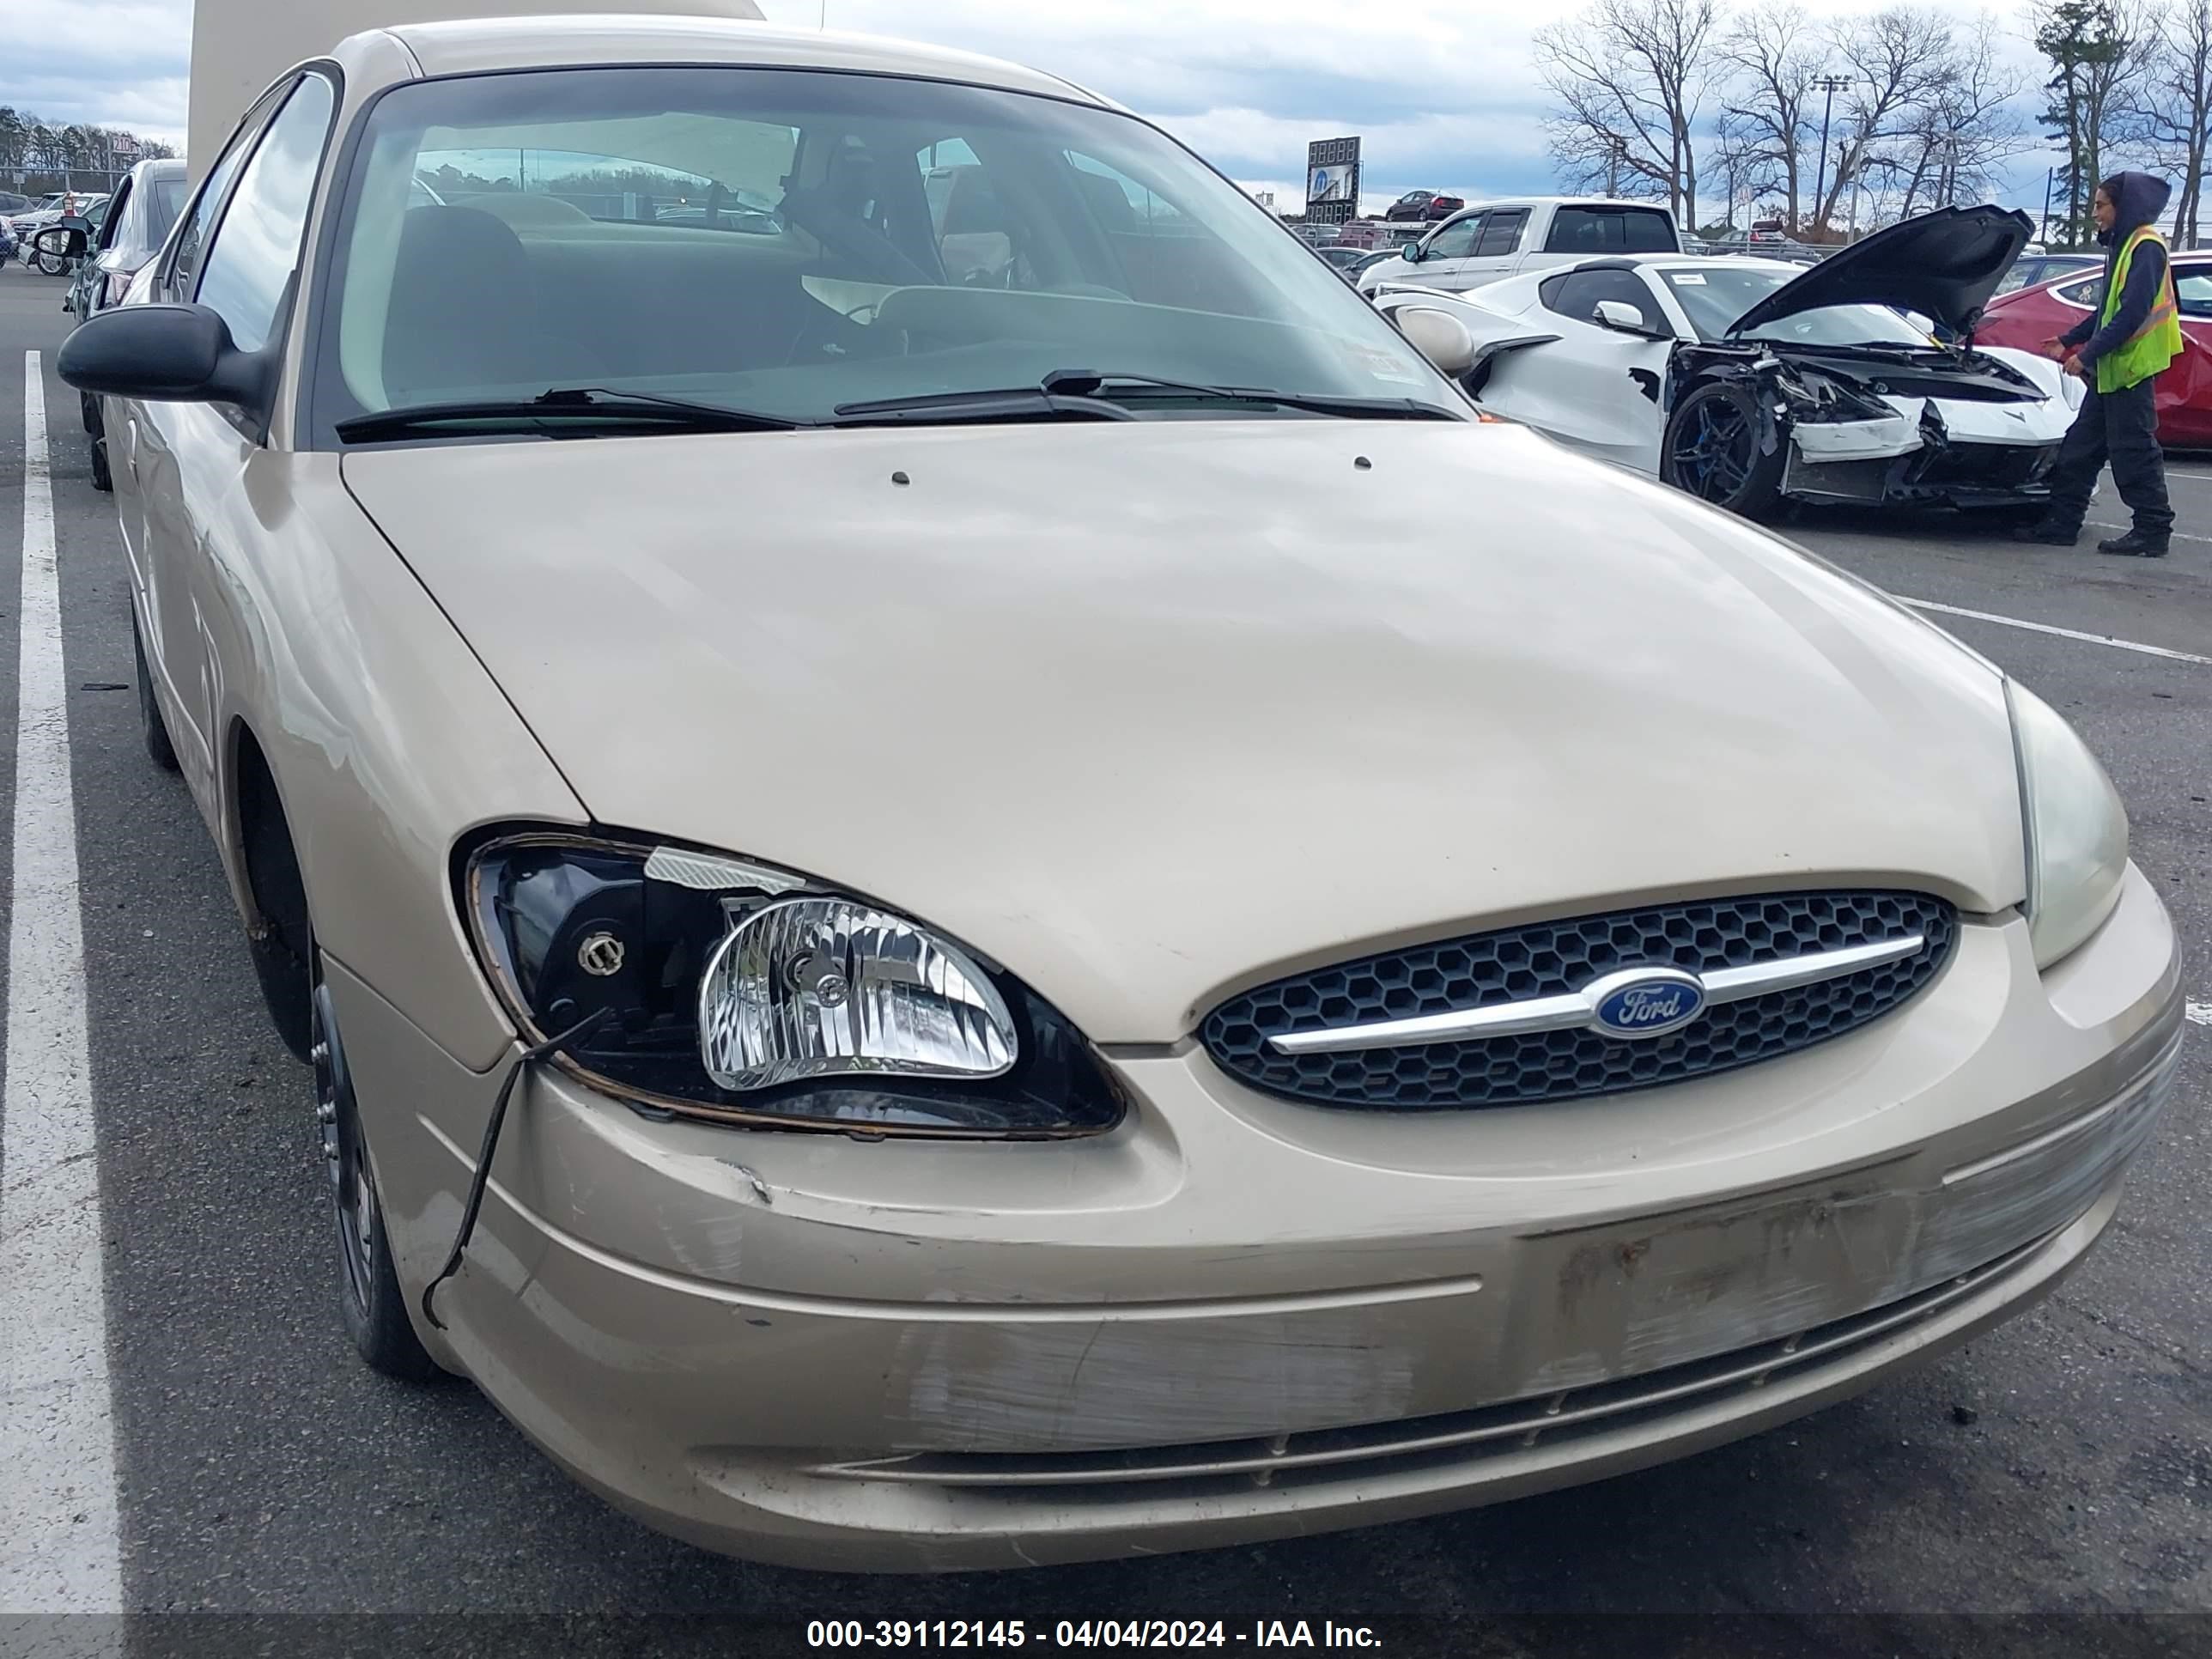 vin: 1FAFP53U51A262728 1FAFP53U51A262728 2001 ford taurus 3000 for Sale in 07726, 230 Pension Rd, Englishtown, New Jersey, USA